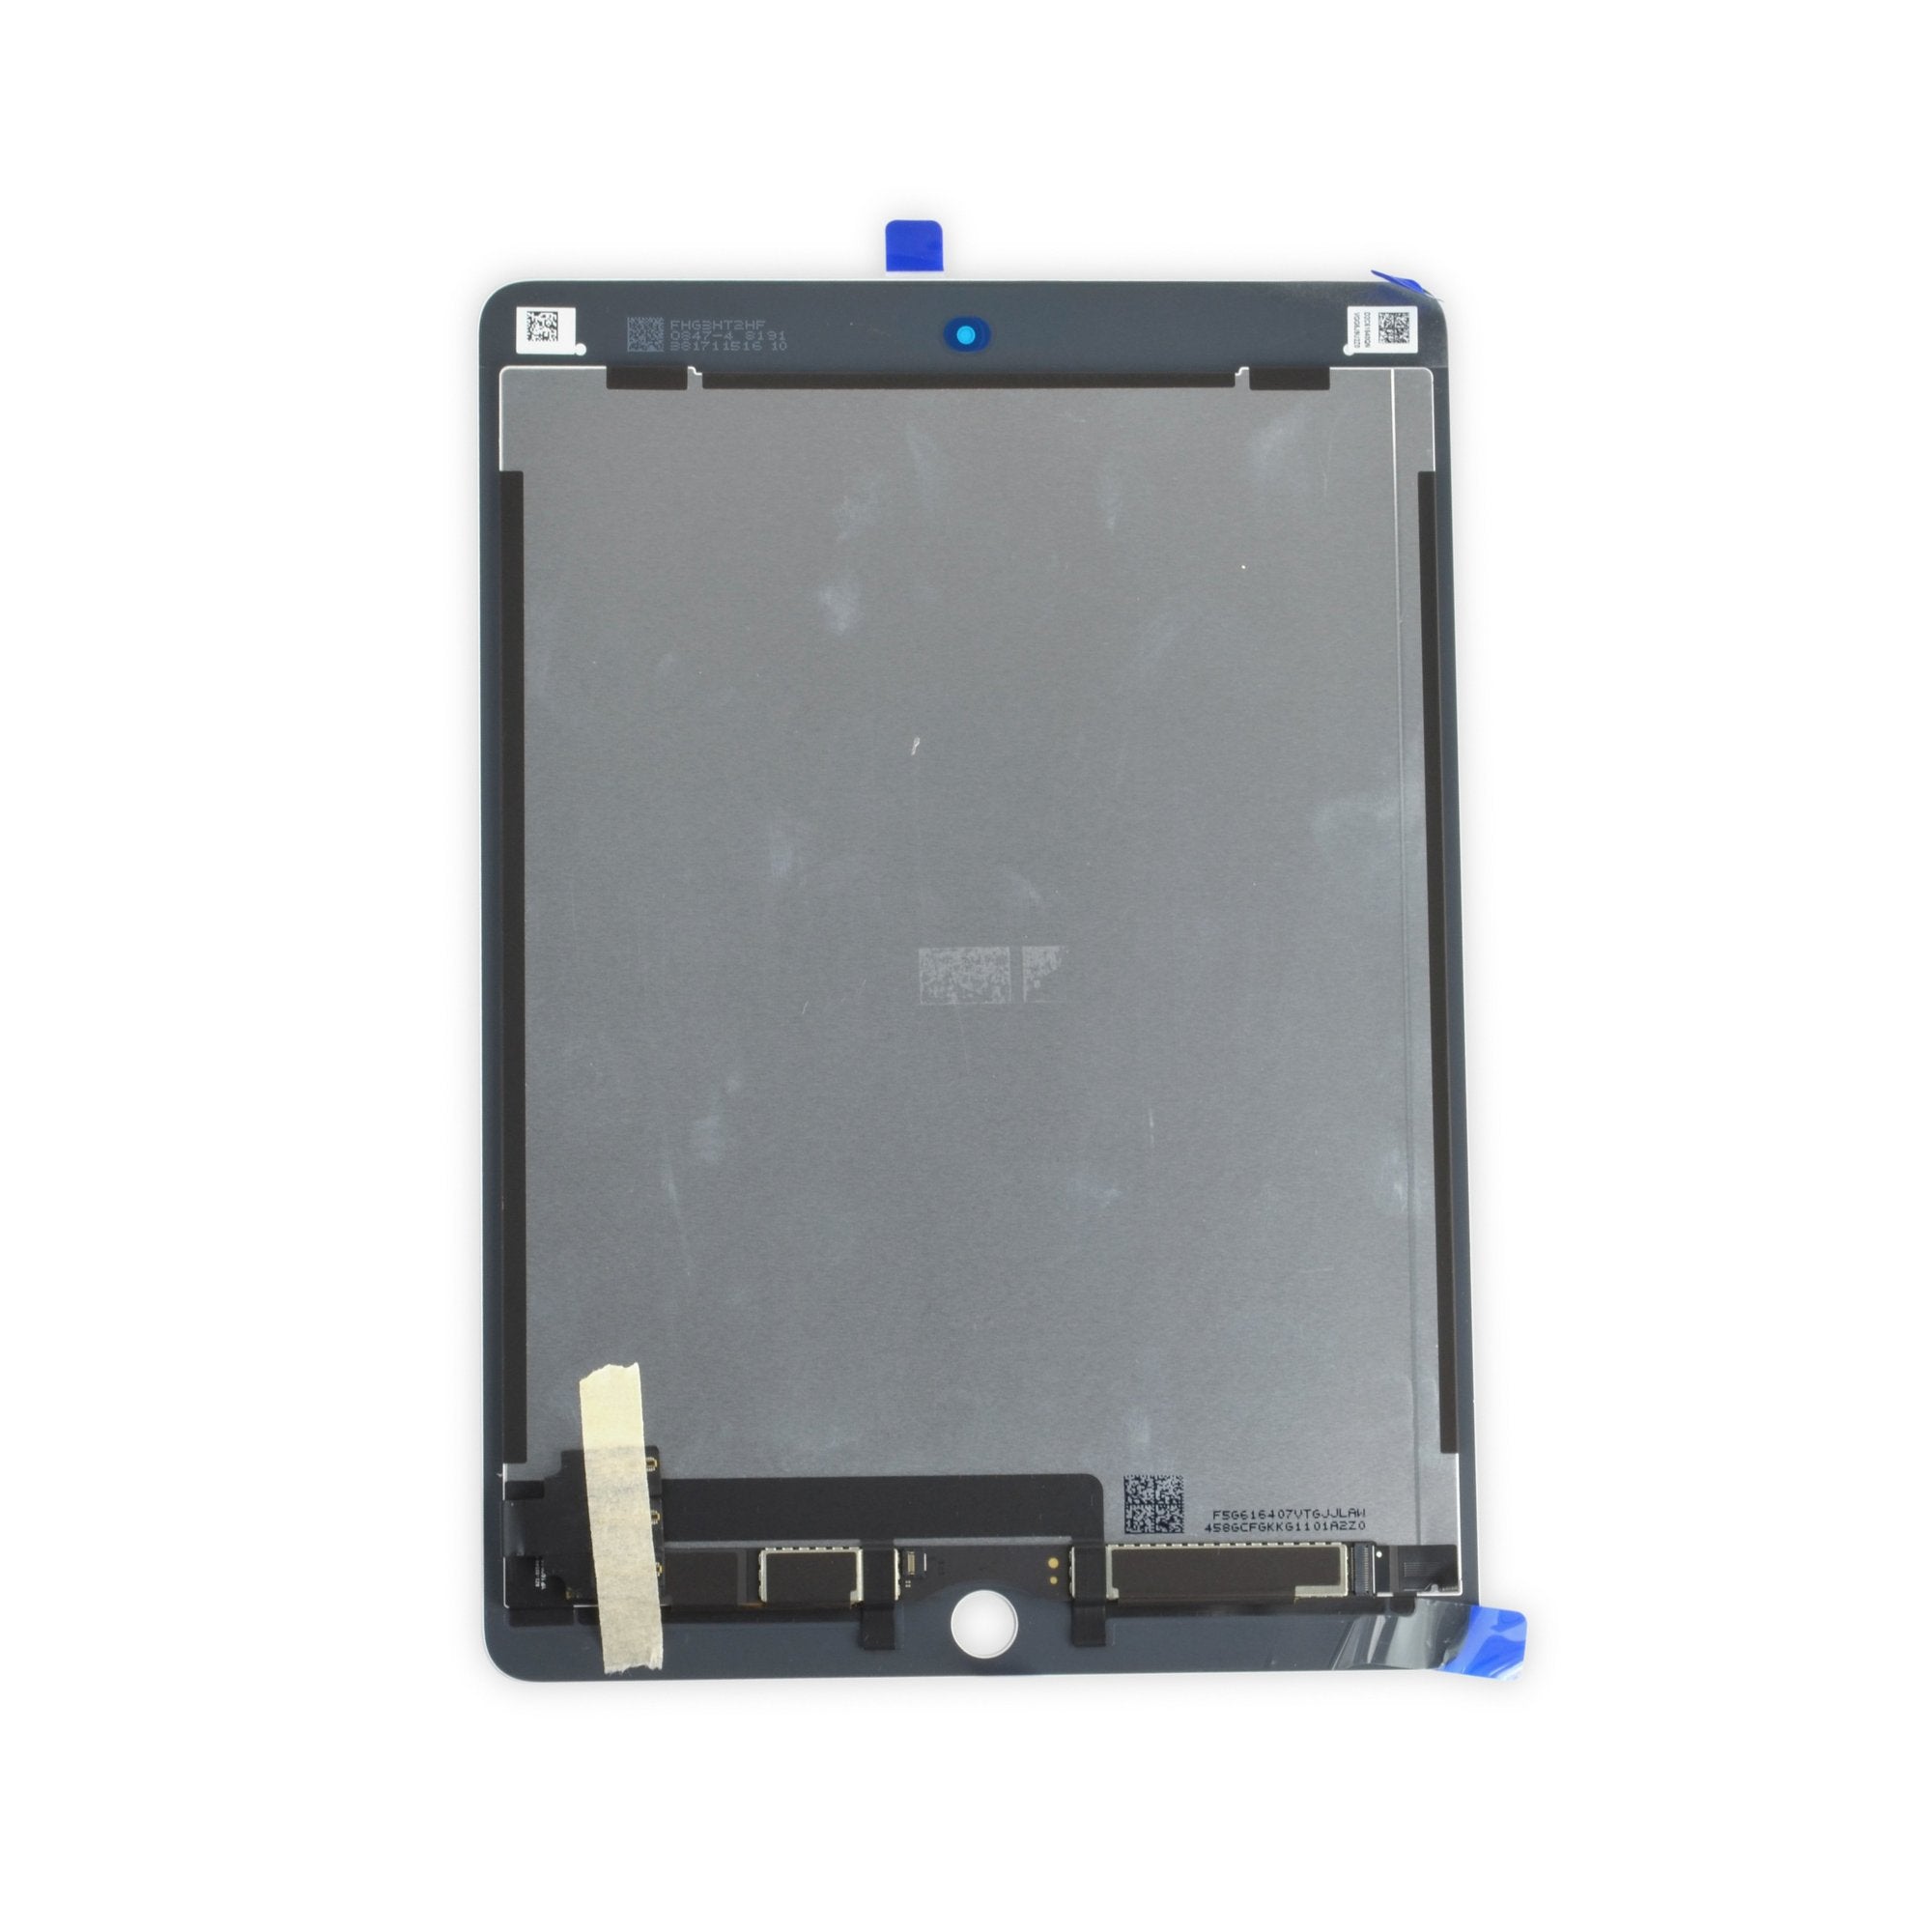 iPad Pro 9.7 LCD & Touch Screen Replacement Guide - RepairsUniverse 